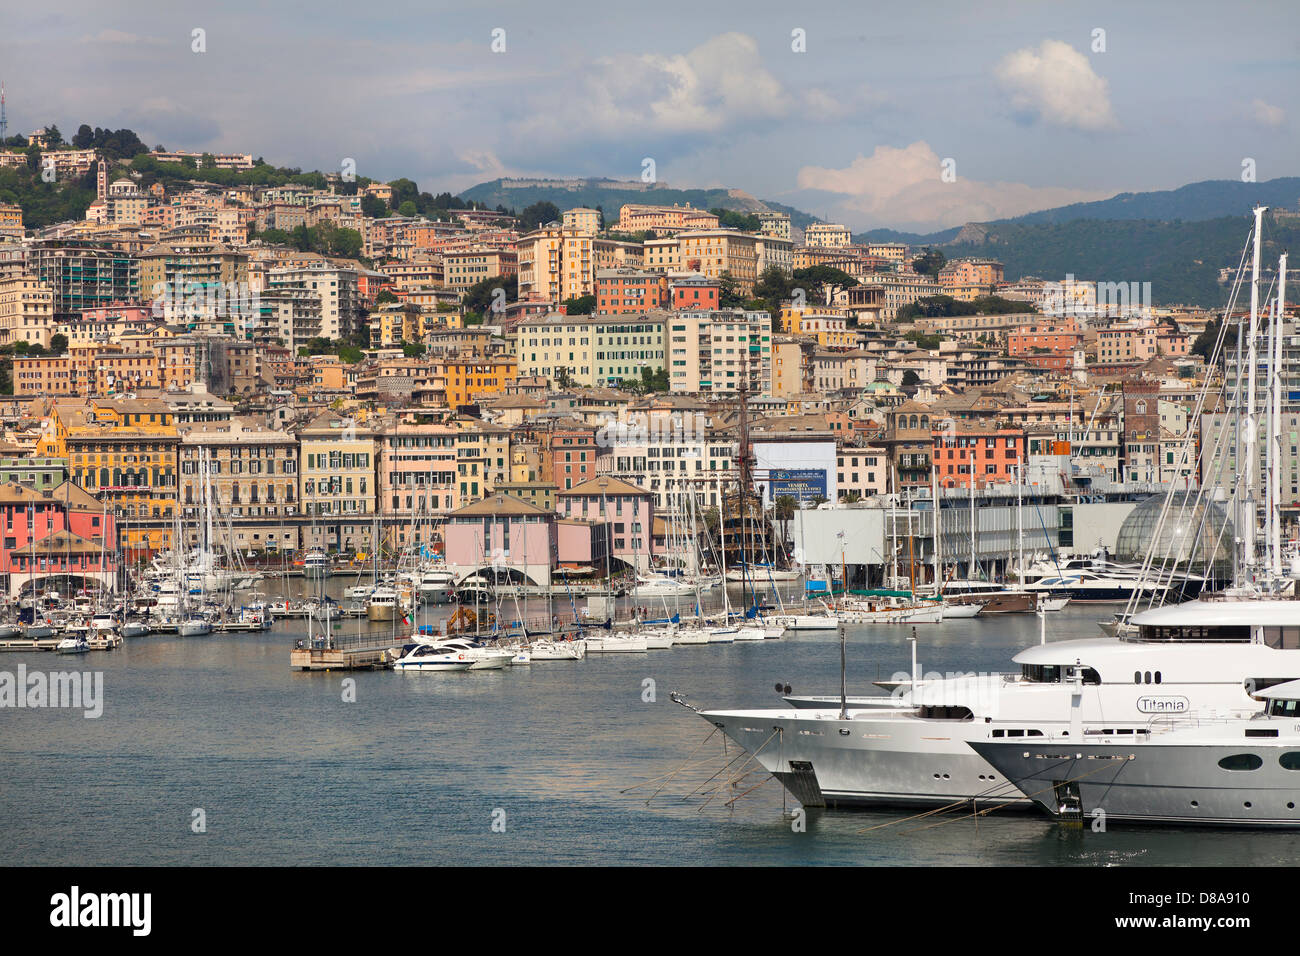 Genoa port, Italy, dockside view looking inland, typical Genoa houses. Private yachts in foreground. Stock Photo